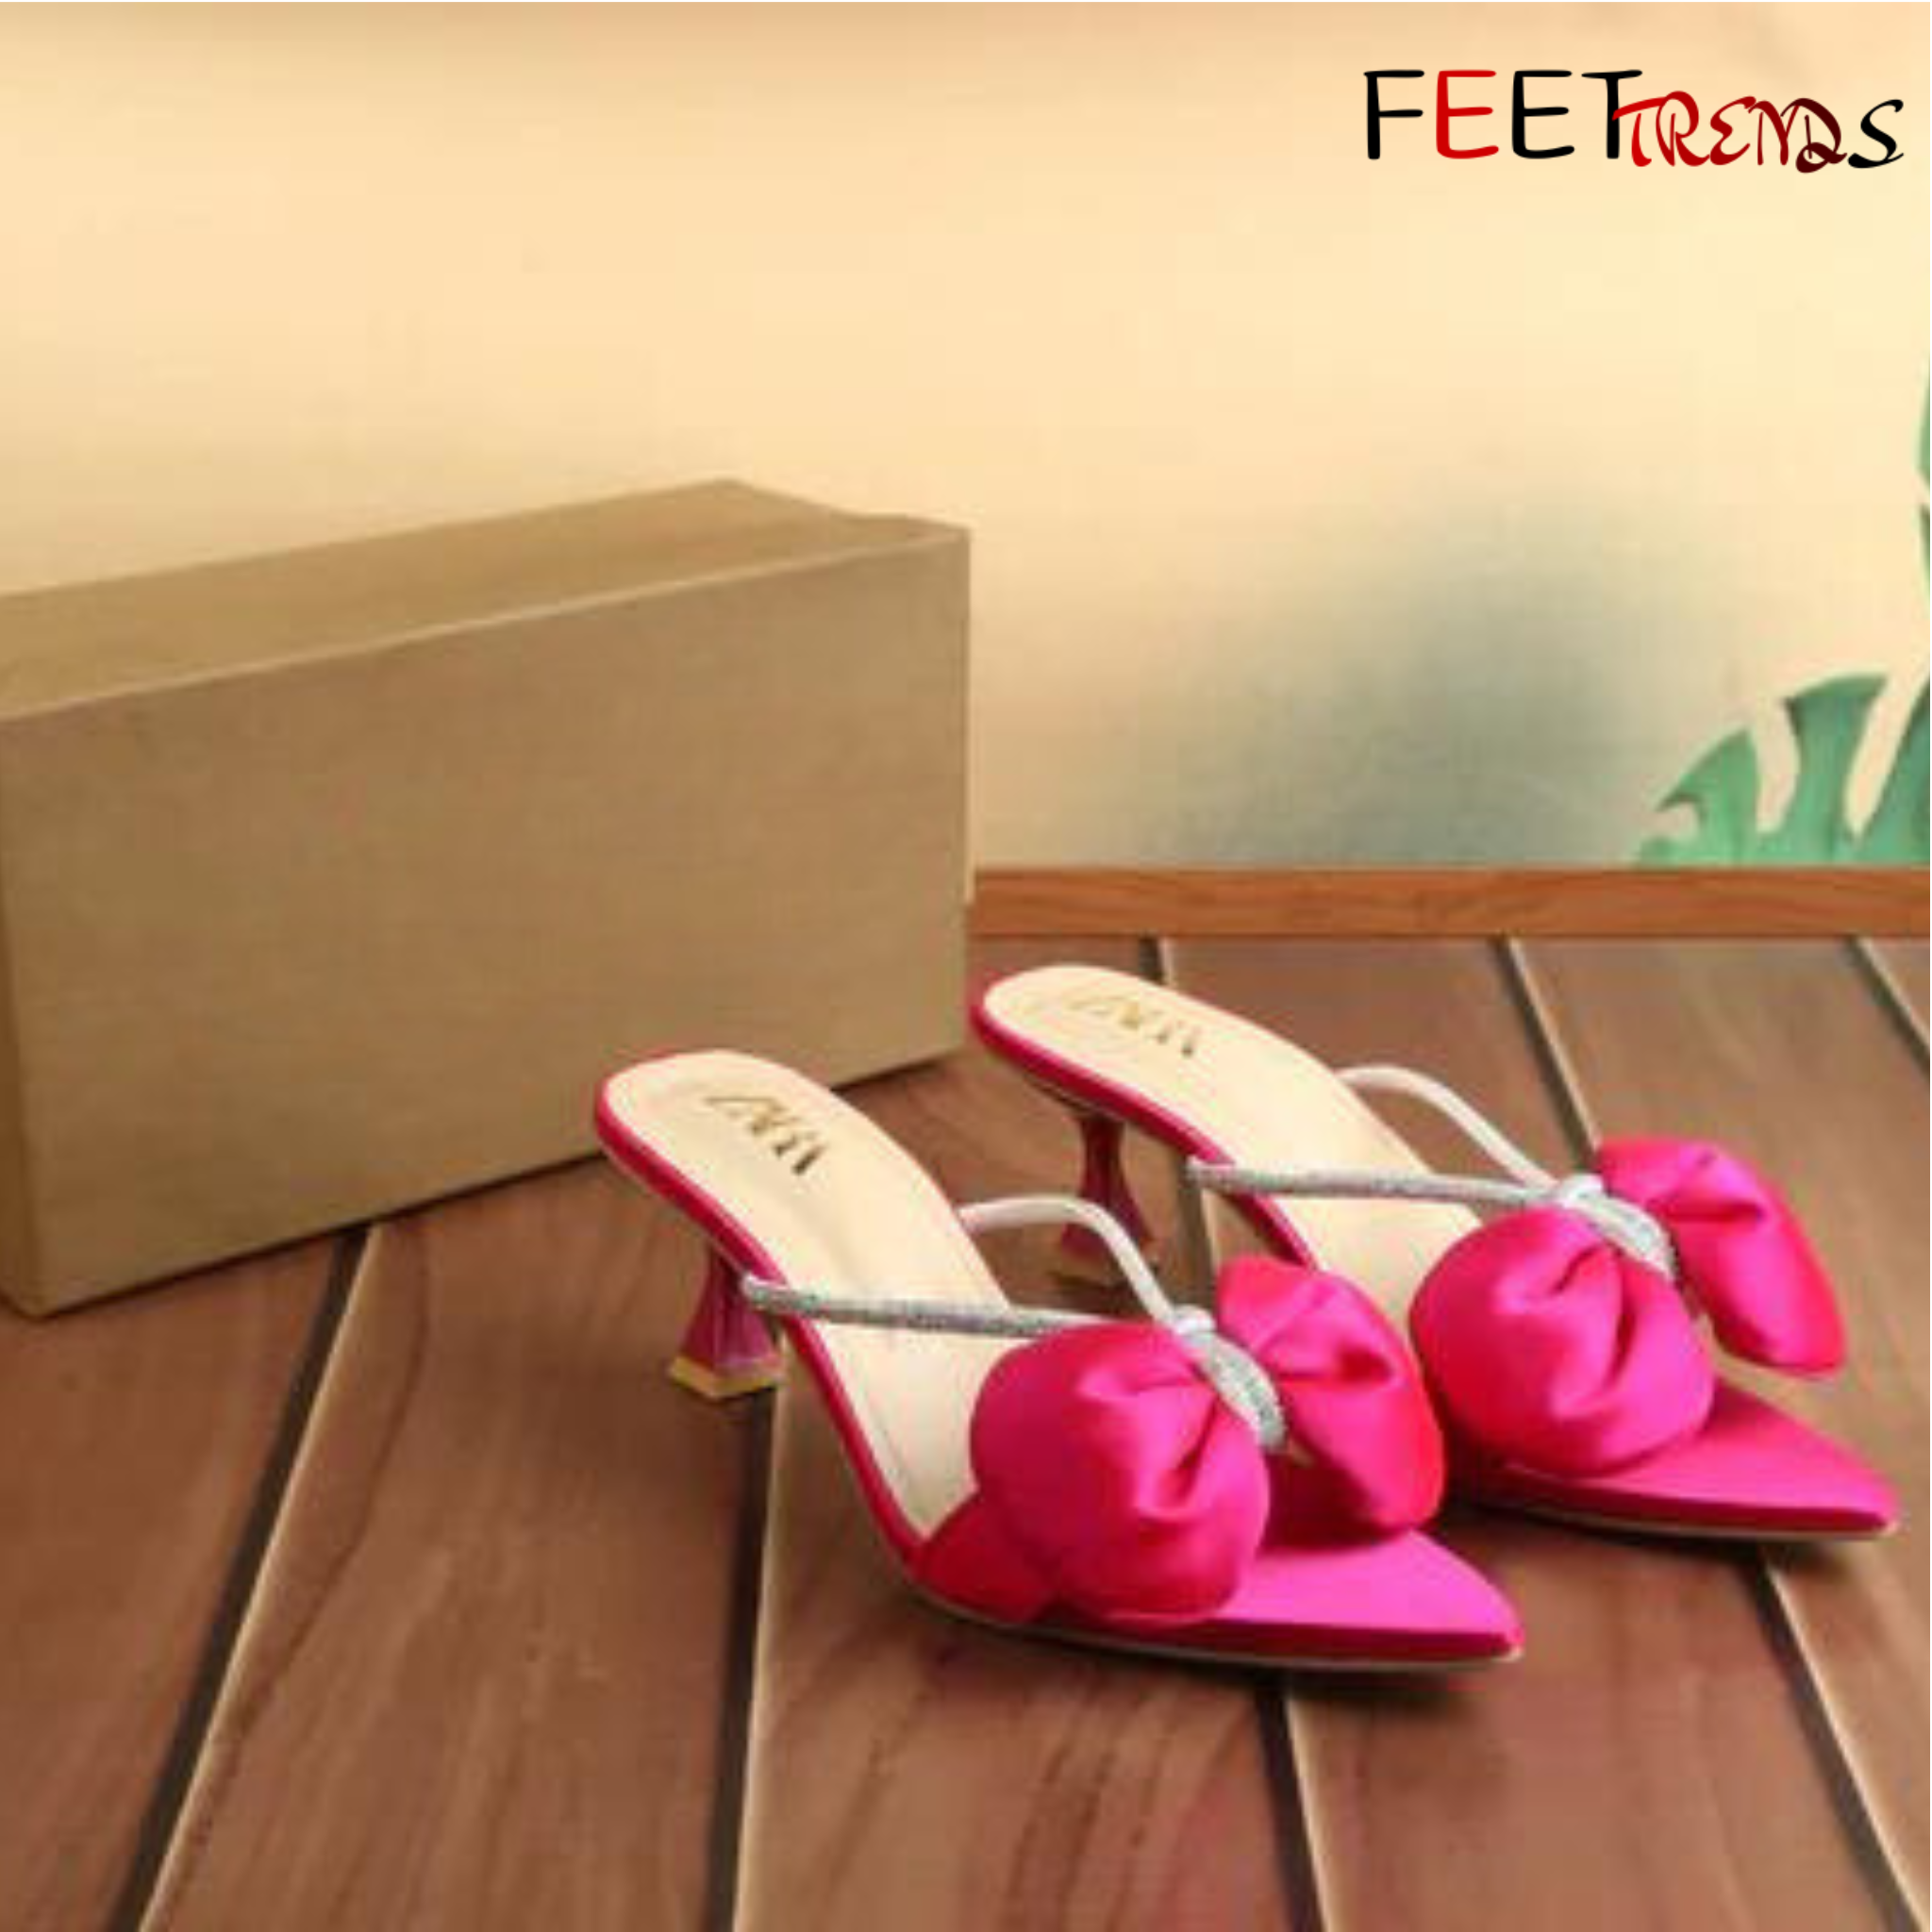 FEET TRENDS ARTICLE {039}